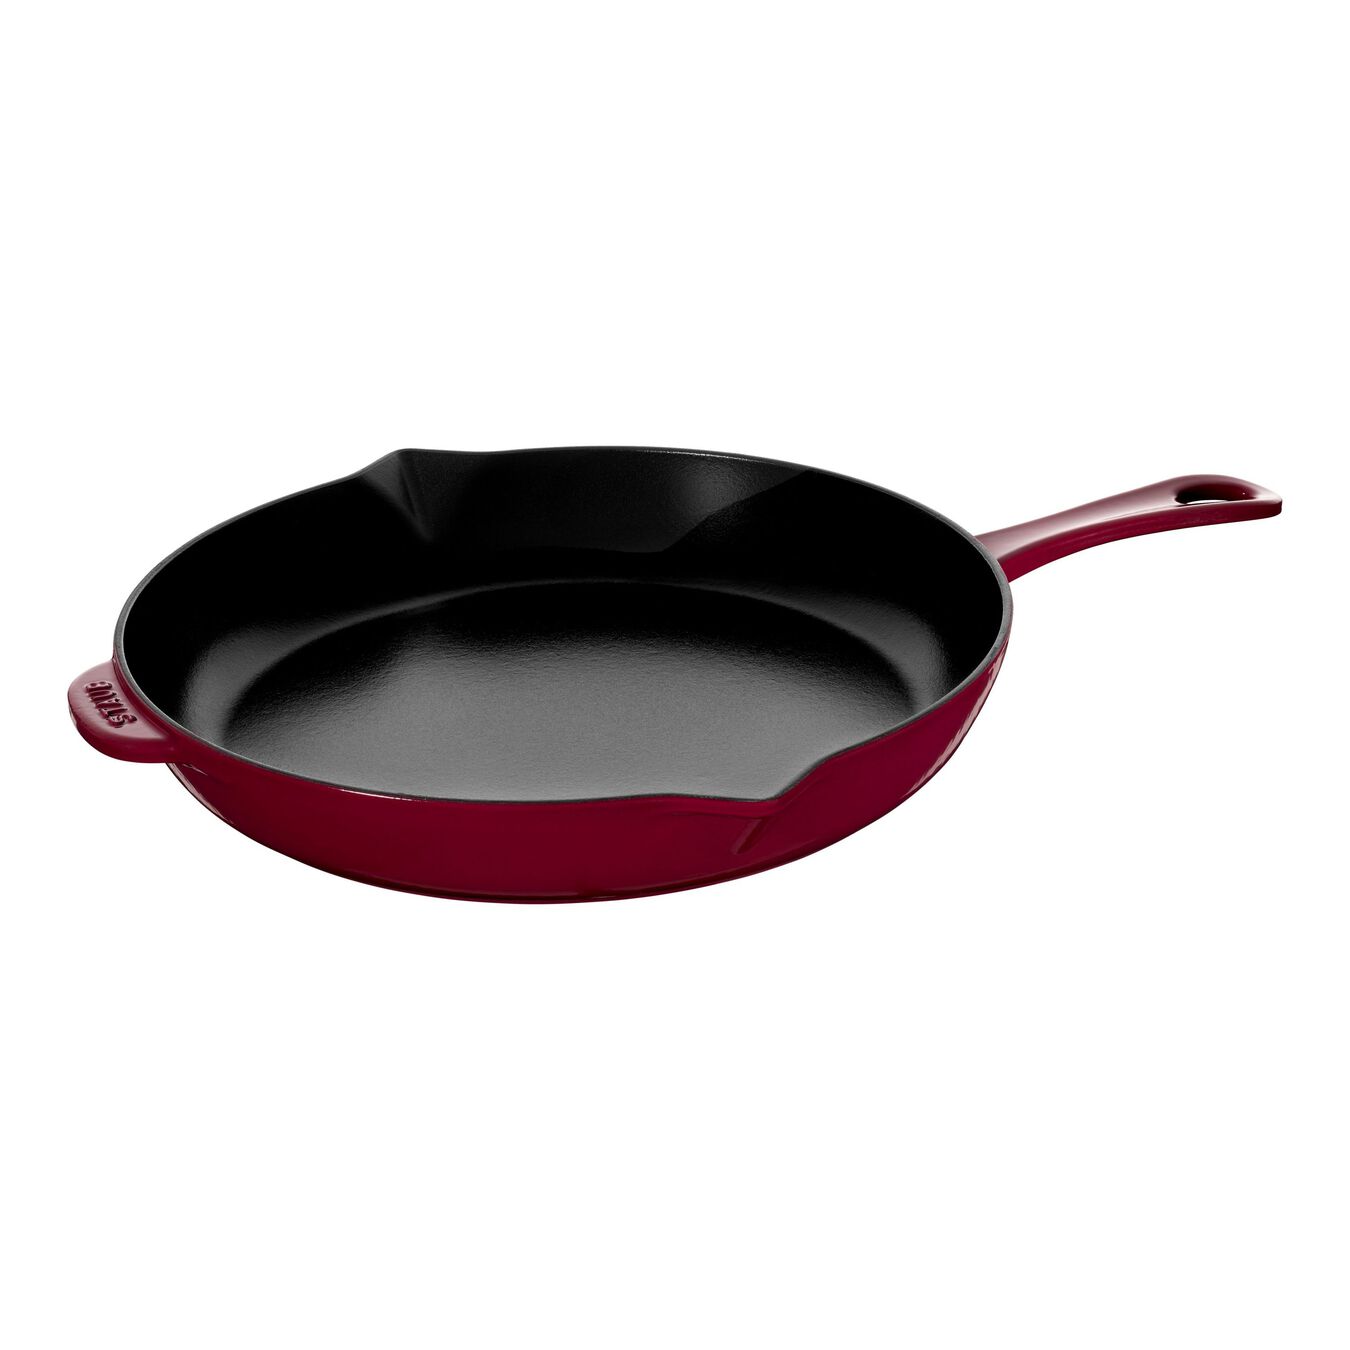 30 cm / 12 inch cast iron Frying pan, Bordeaux - Visual Imperfections,,large 1